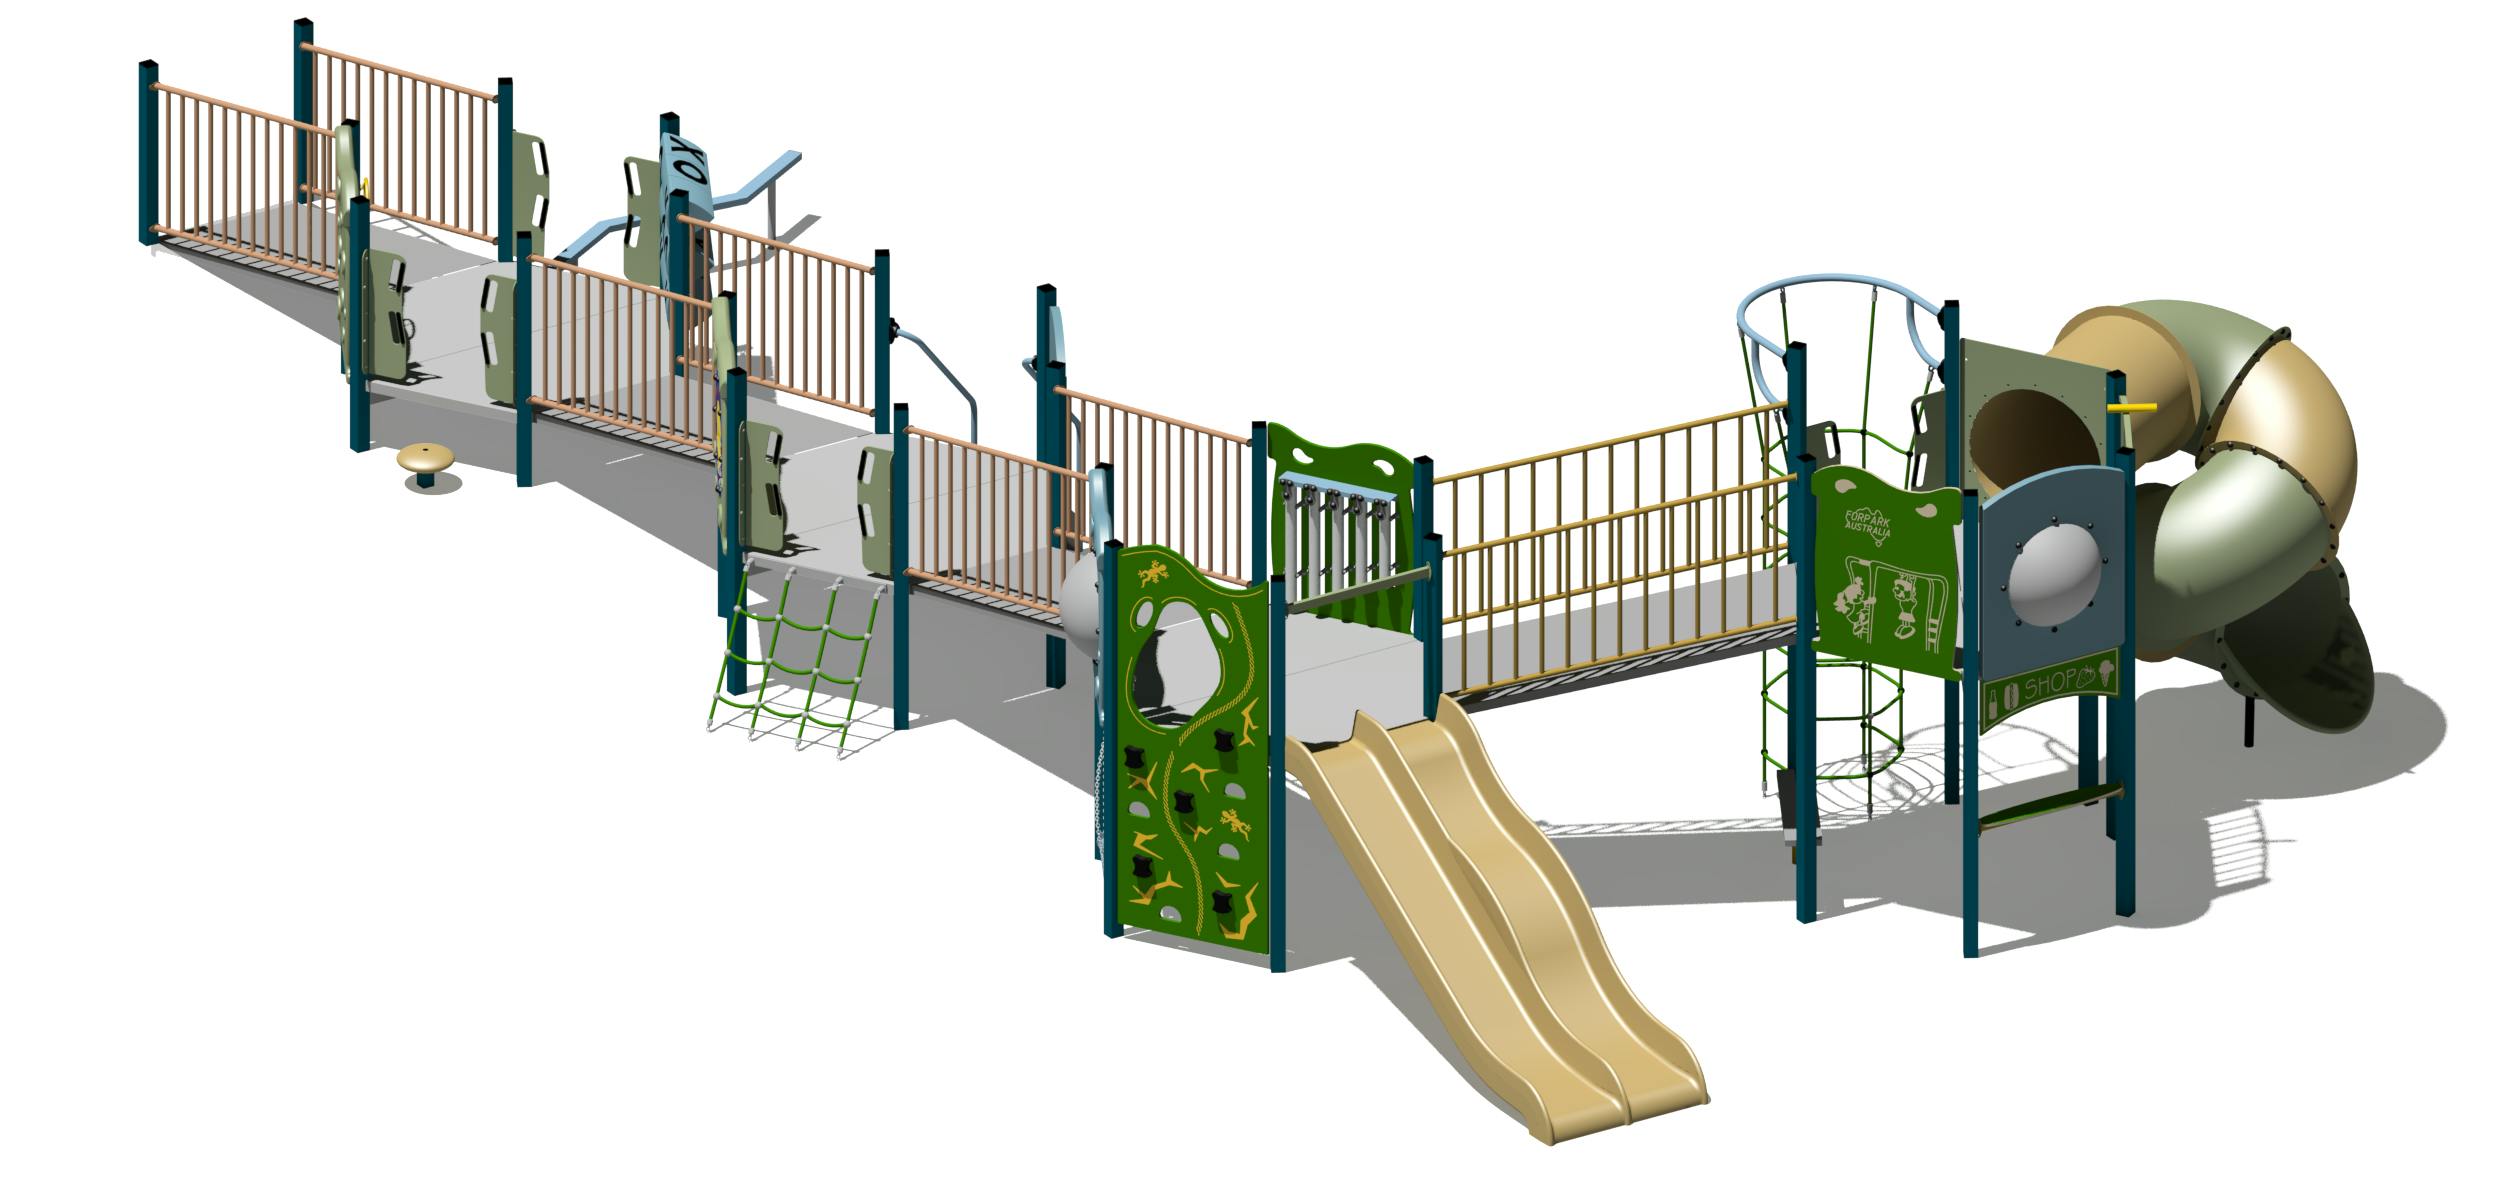 South-east view of play structure final design